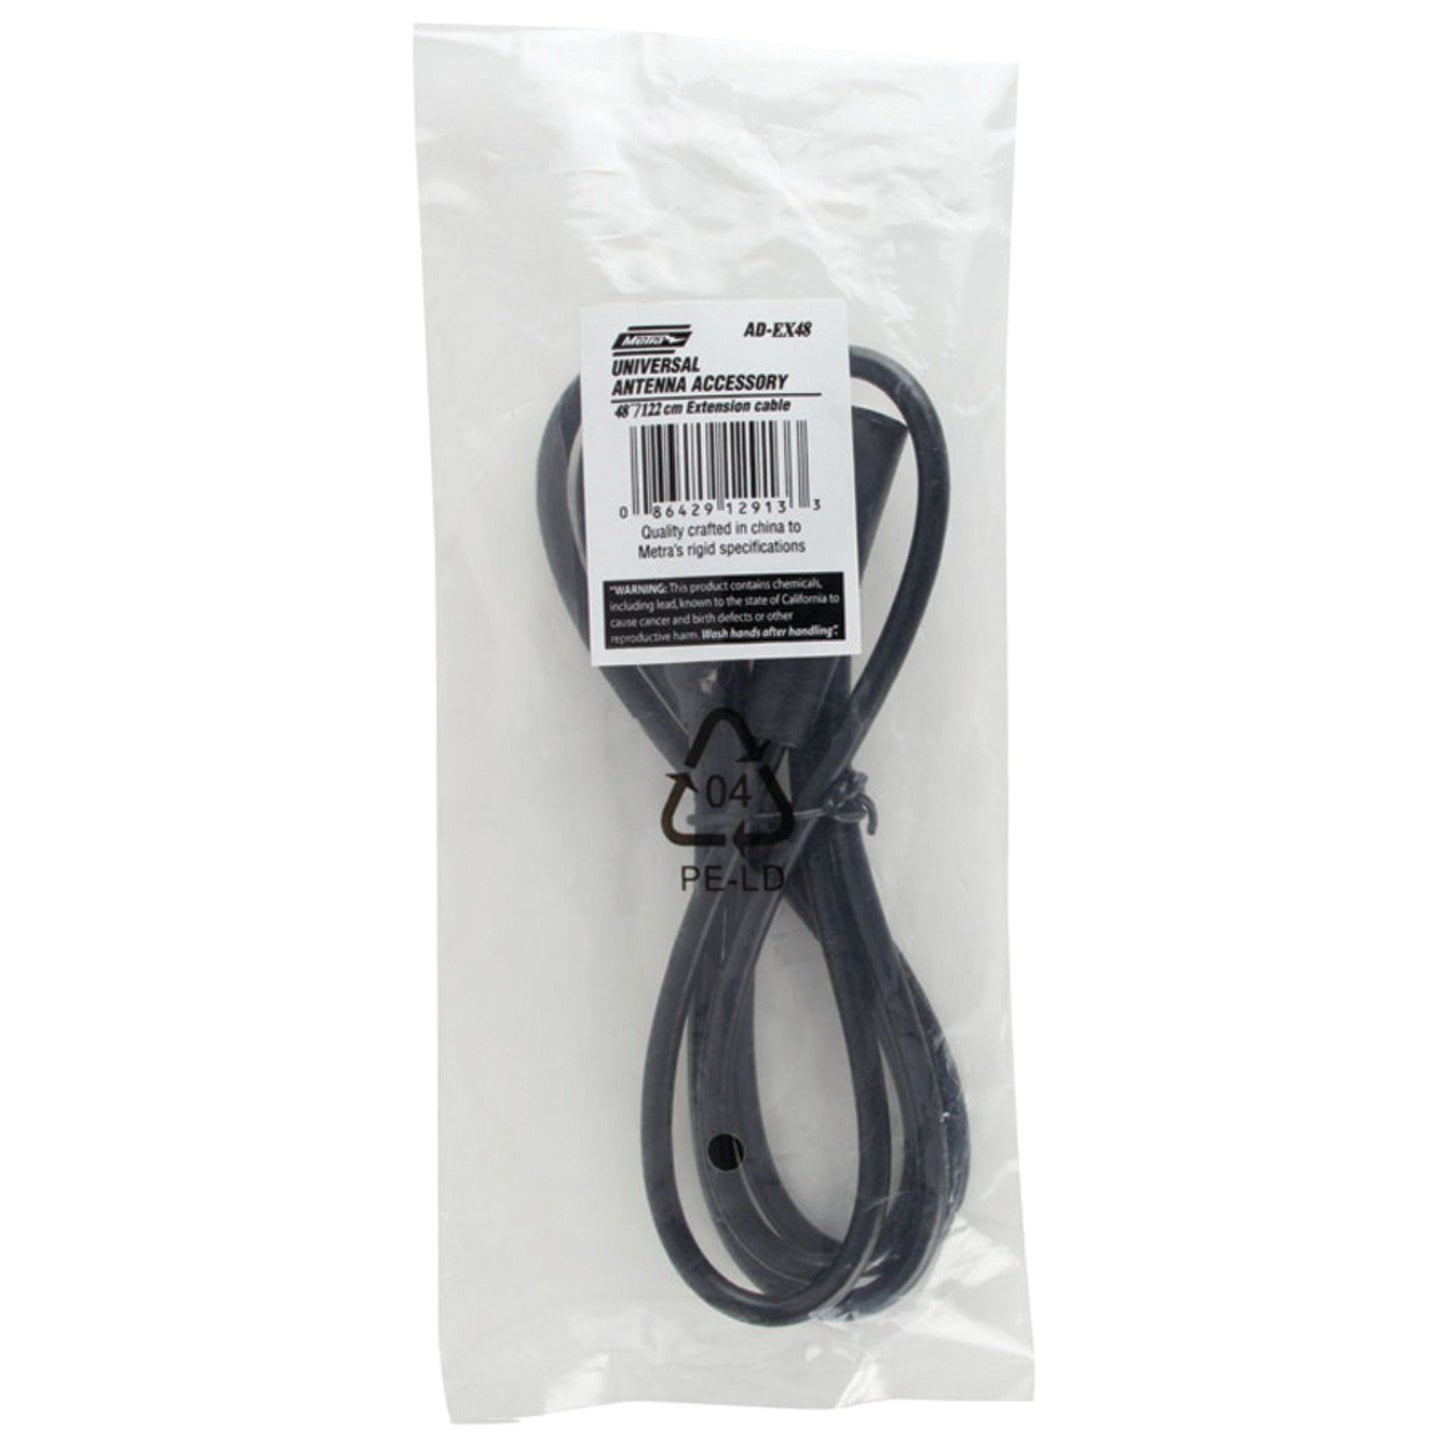 Metra AD-EX48 Antenna Extension Cable, 2ft